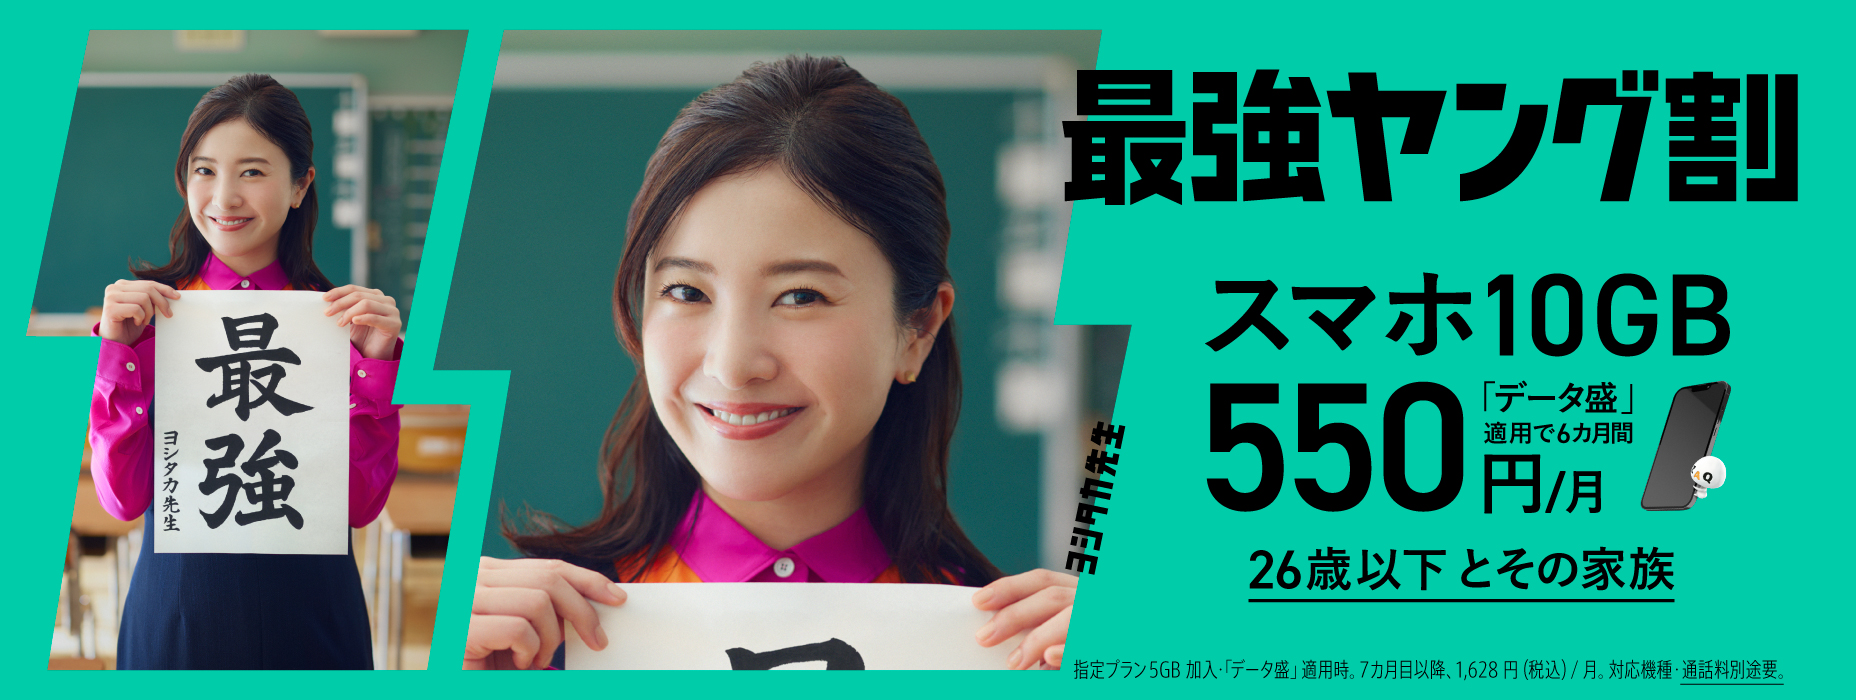 550 yen/month for 6 months with Saikyo Young Wari smartphone 10GB Date Mori for under 26 years old and their families